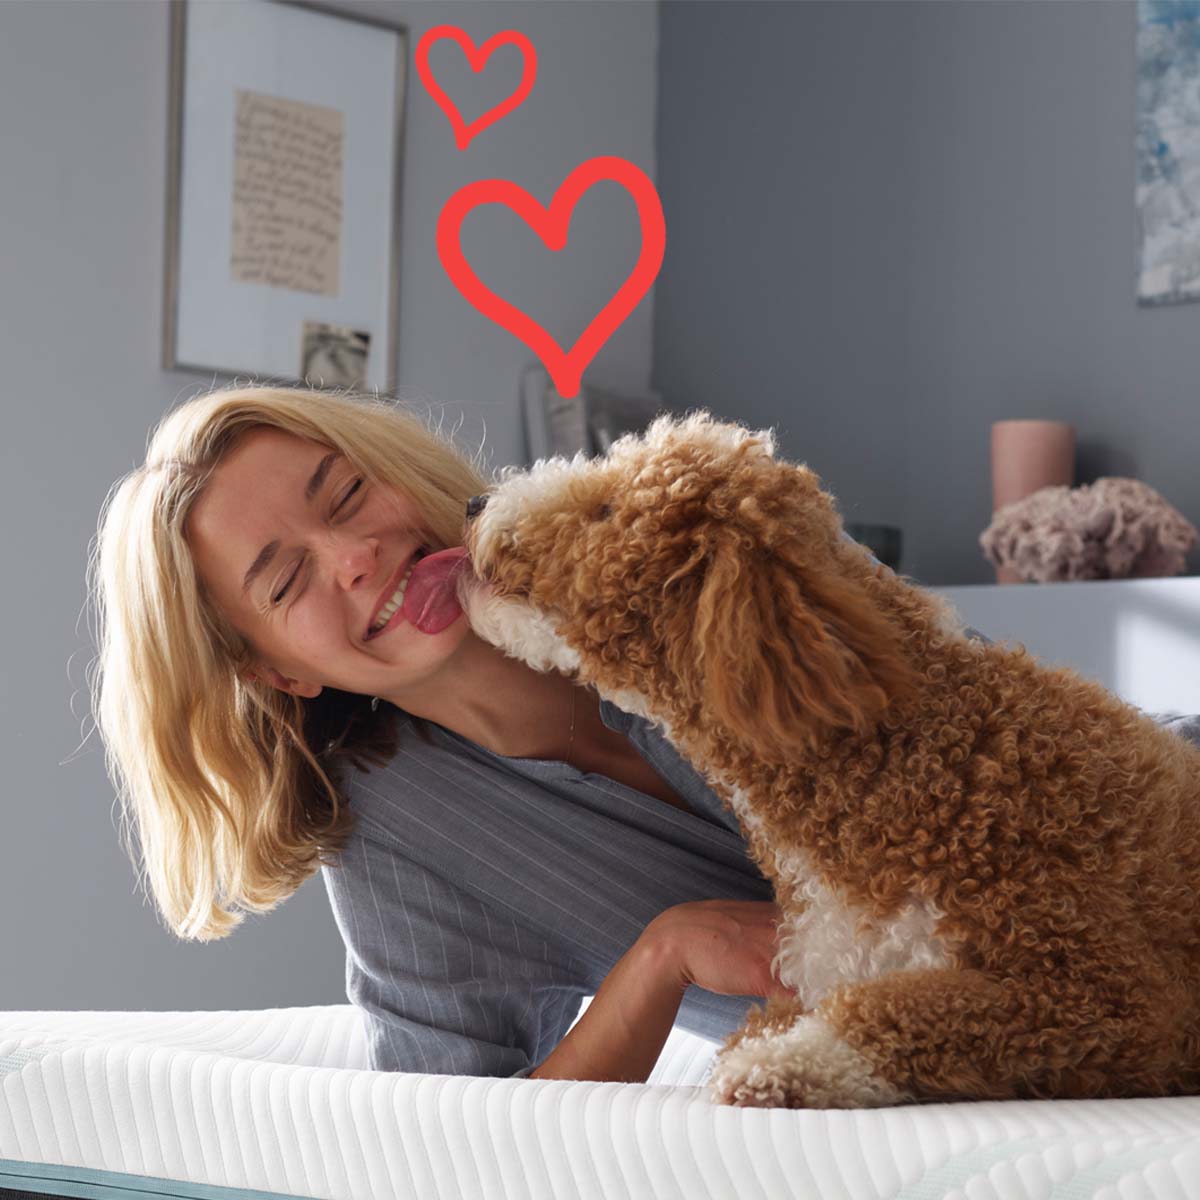 Happy Valentine's Day. 
Enjoy your favorite smoocher and share this post with them.

#valentinesday2023 #delawaremoms #brandywinevalley #chestercountypa #greenvillede #newportde #ecosleep #greenmattress #sweetdreams #bedsofdelaware #cocooning